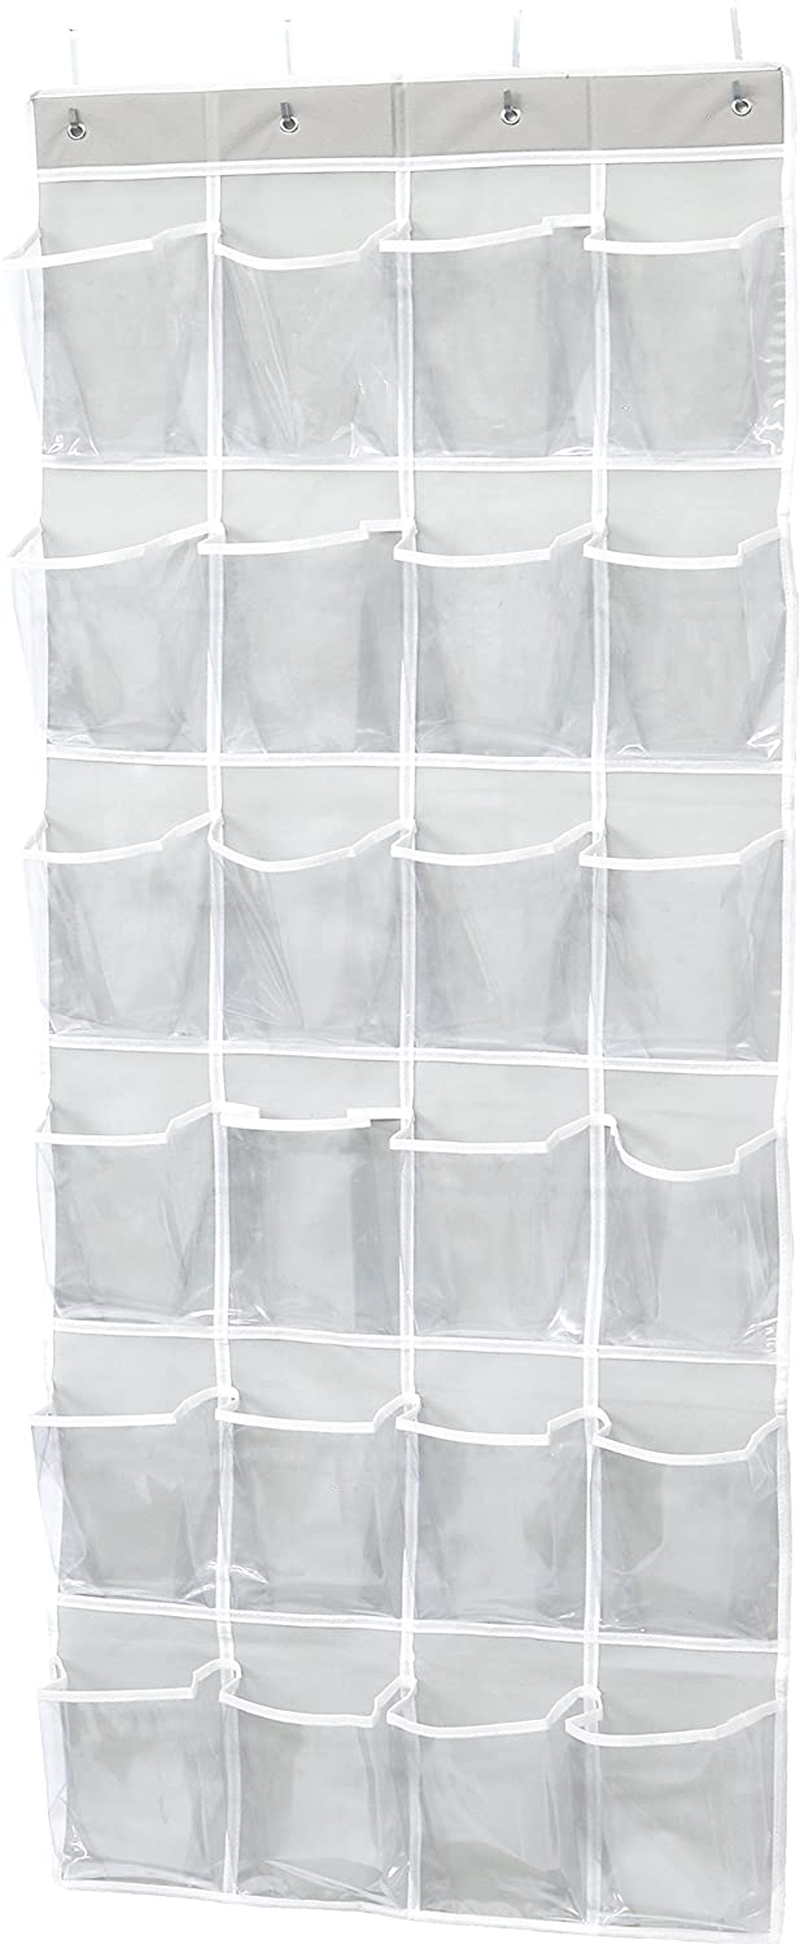 Simple Houseware 24 Pockets Large Clear Pockets Over The Door Hanging Shoe Organizer, Gray (56" x 22.5")